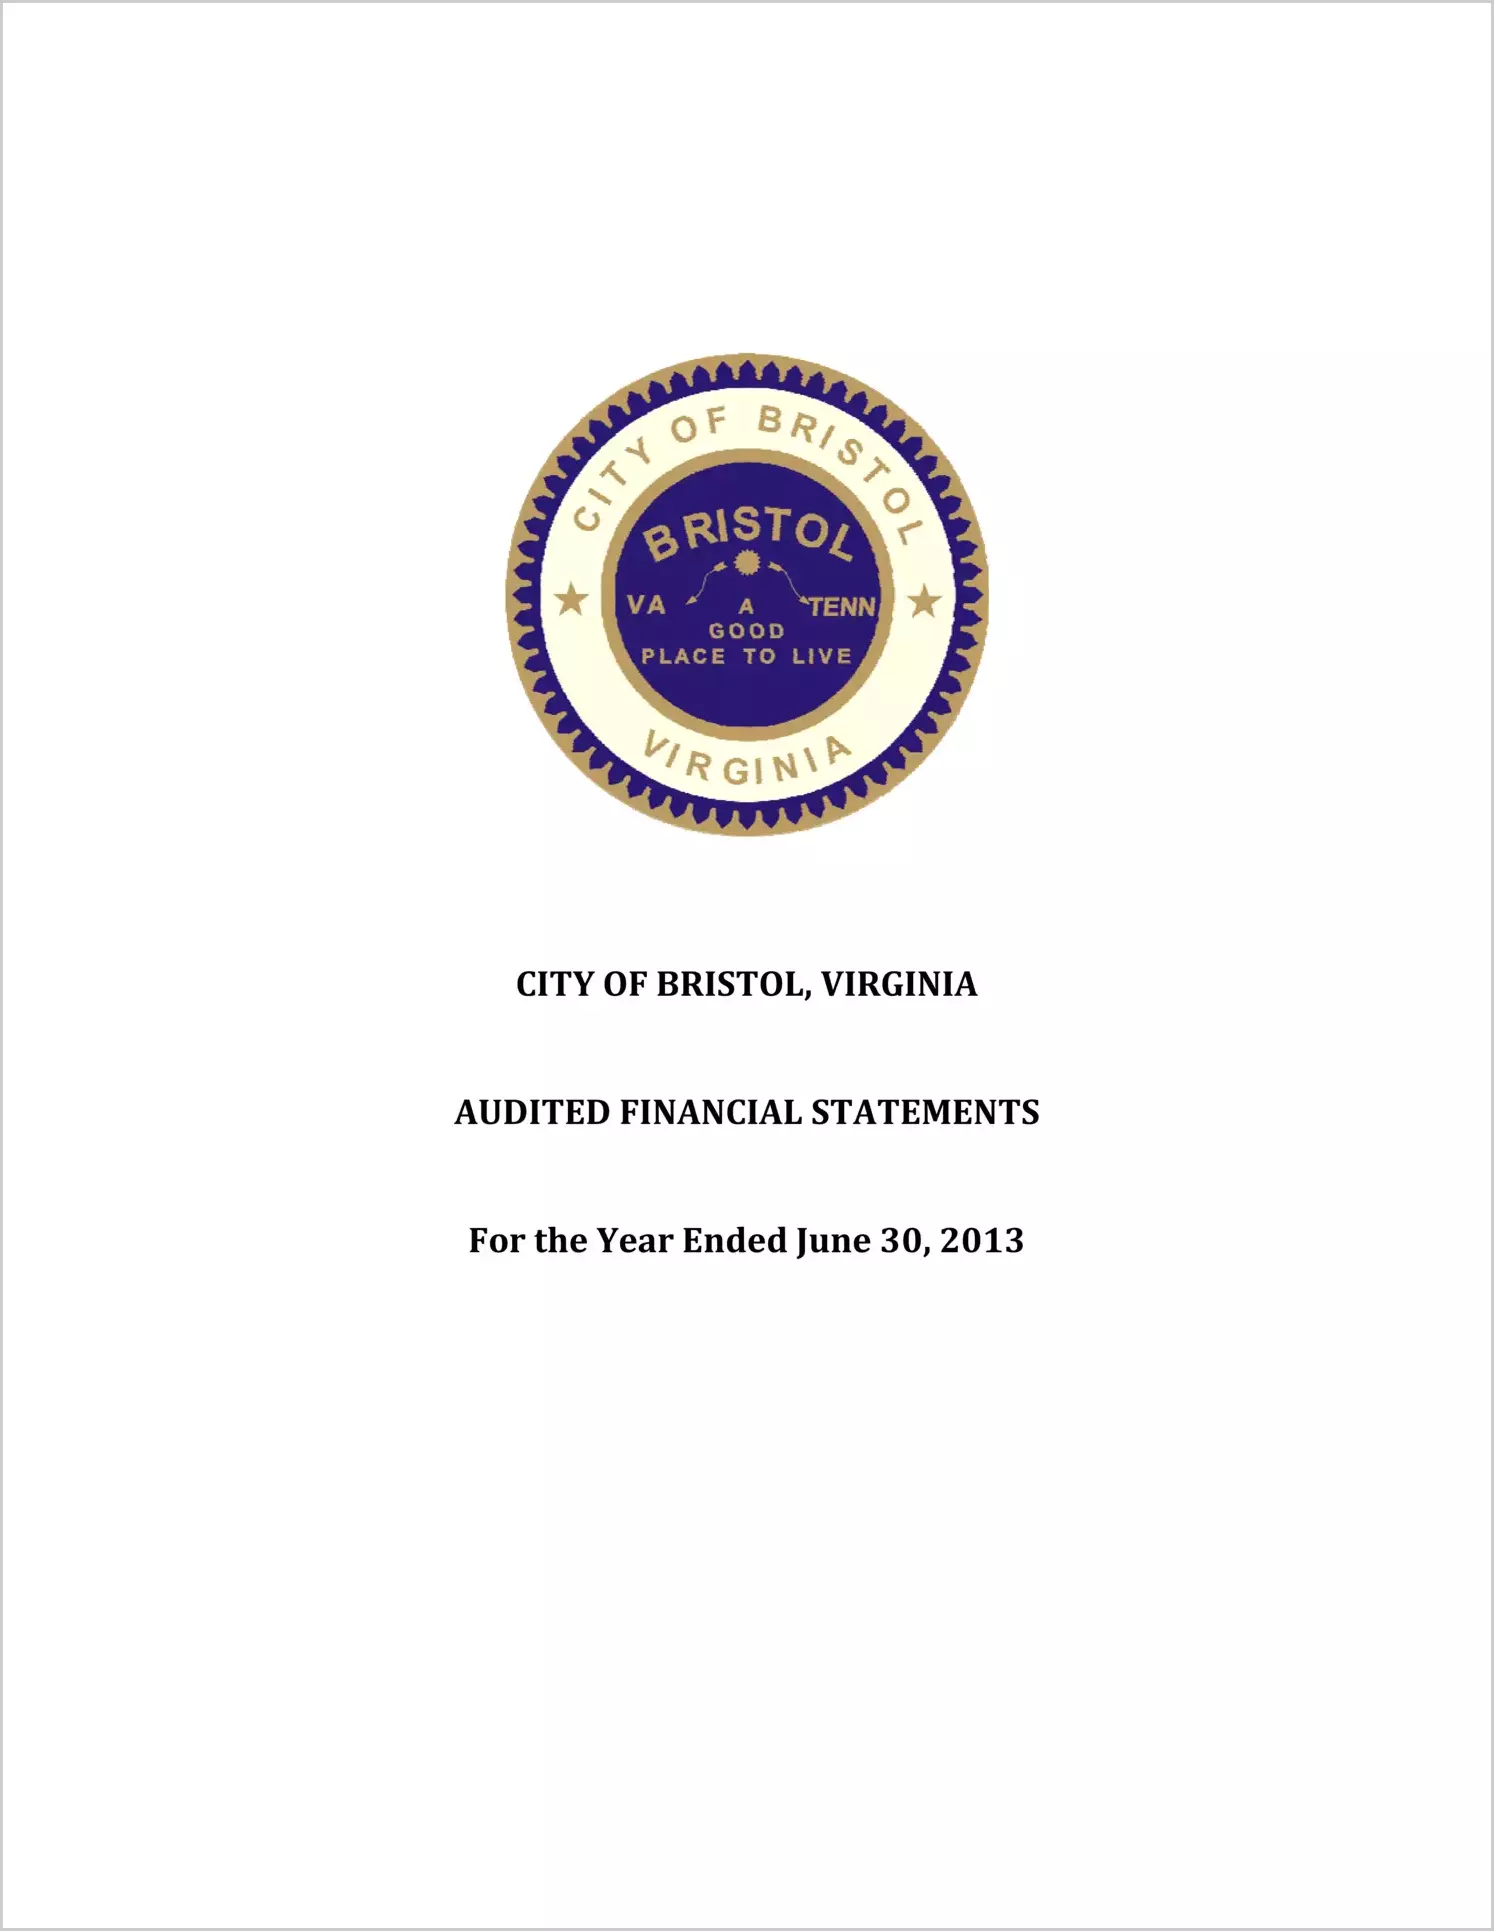 2013 Annual Financial Report for City of Bristol